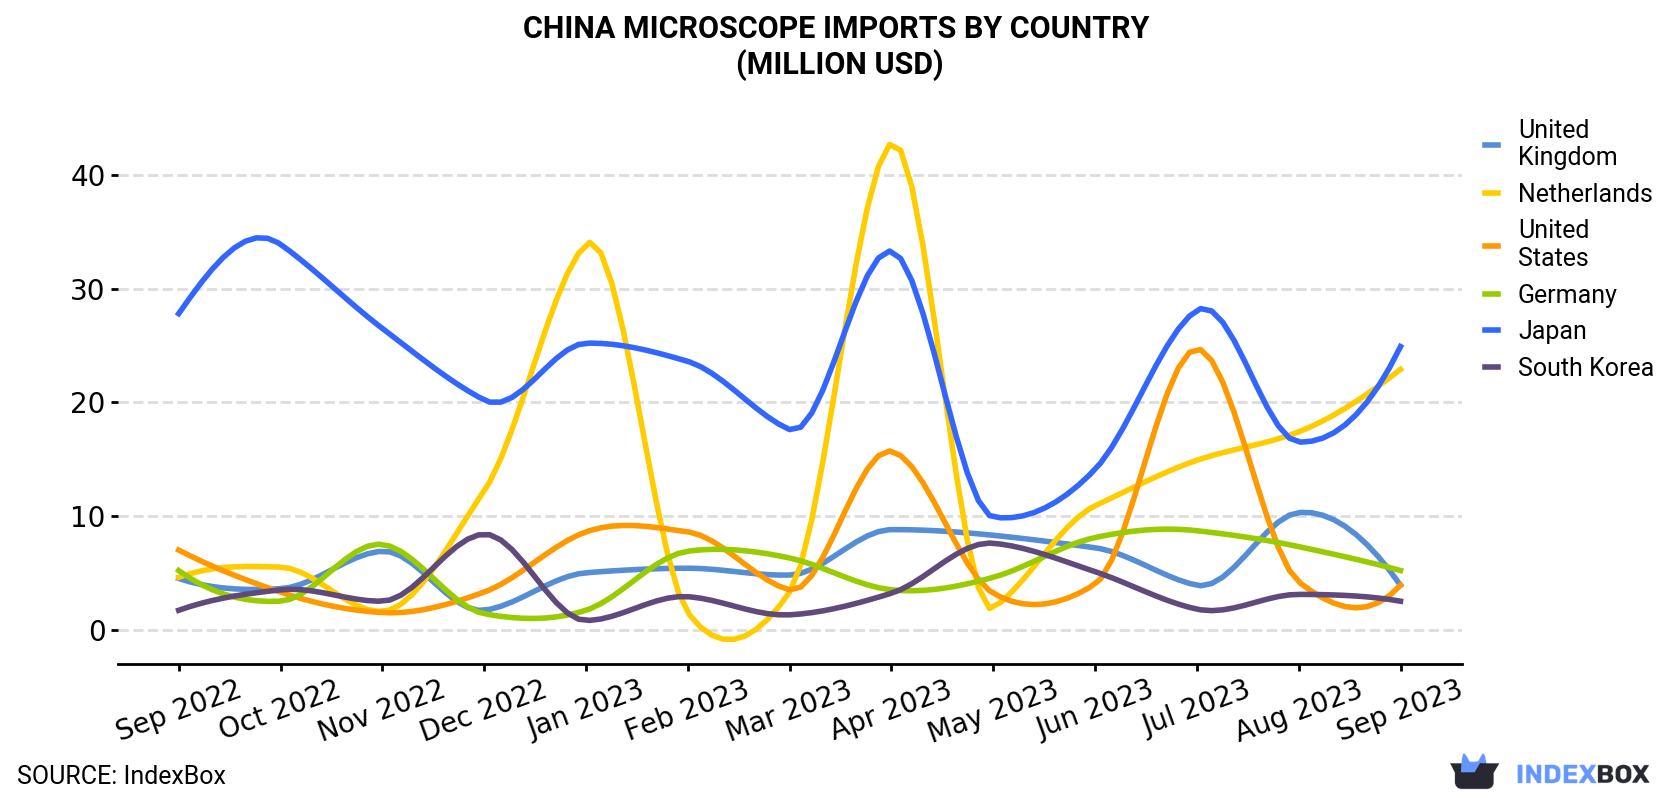 China Microscope Imports By Country (Million USD)